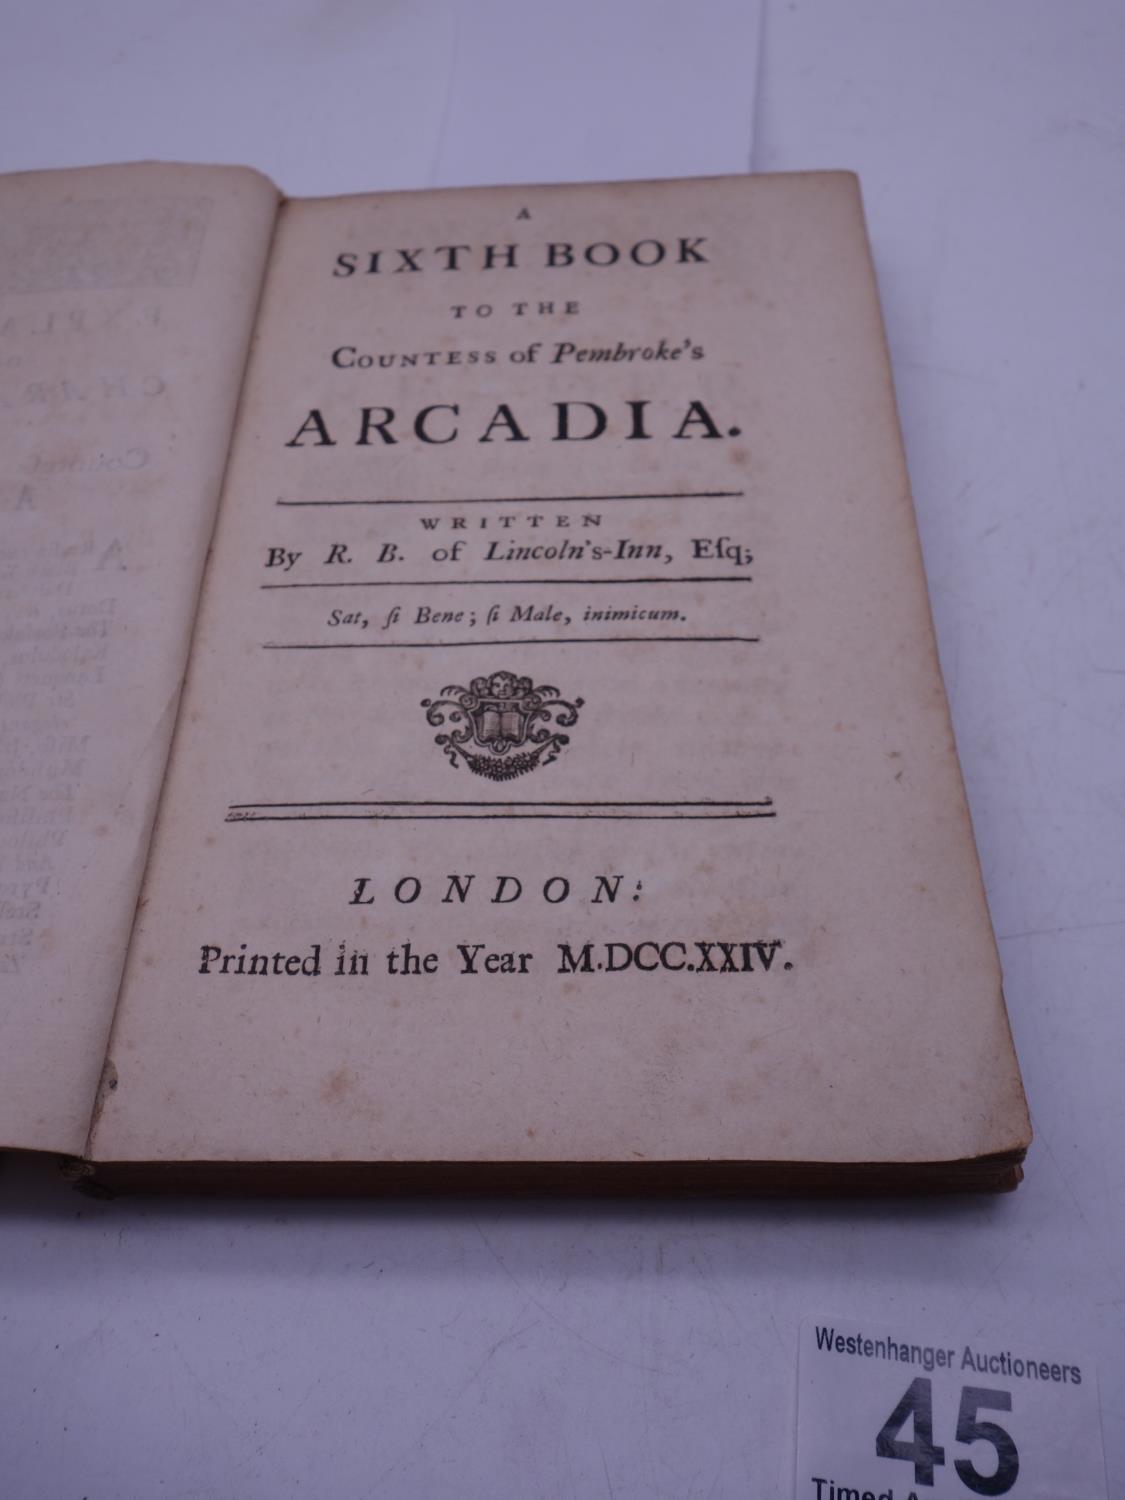 Single copy of the Works of the Honourable Sir Philip Sidney volume 3, published London 1633, The - Image 6 of 8